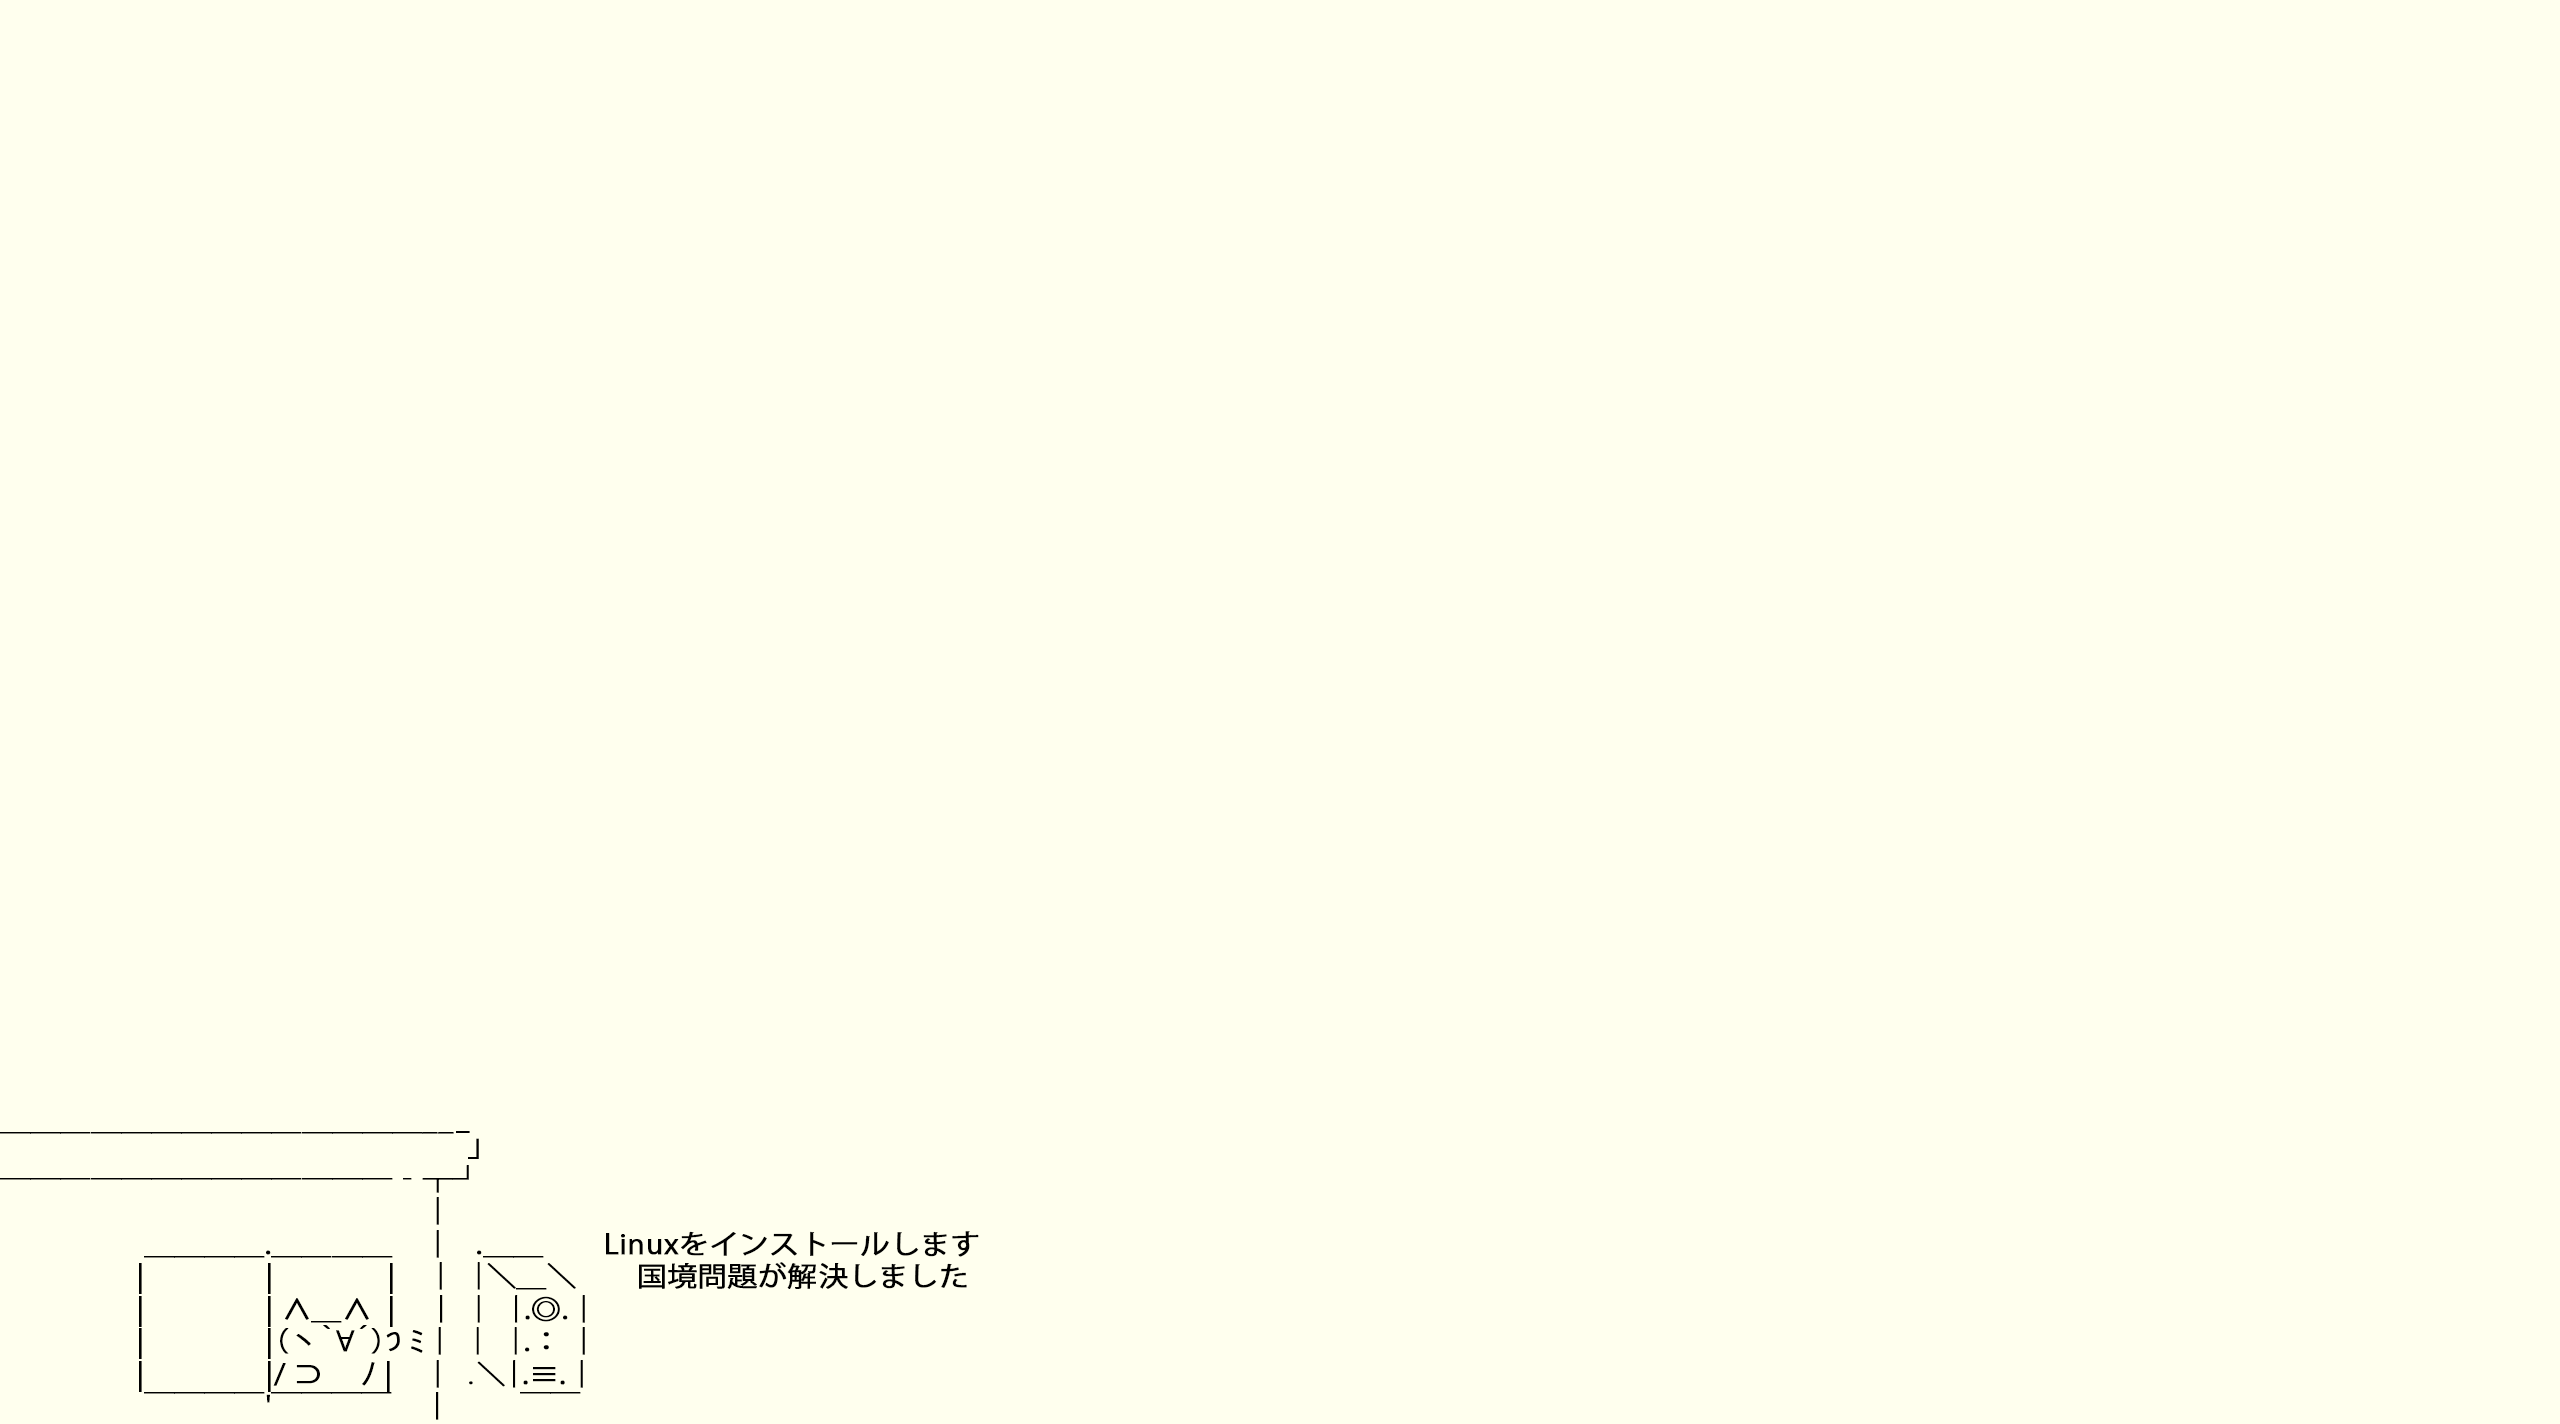 General 2560x1424 minimalism simple background white background Linux